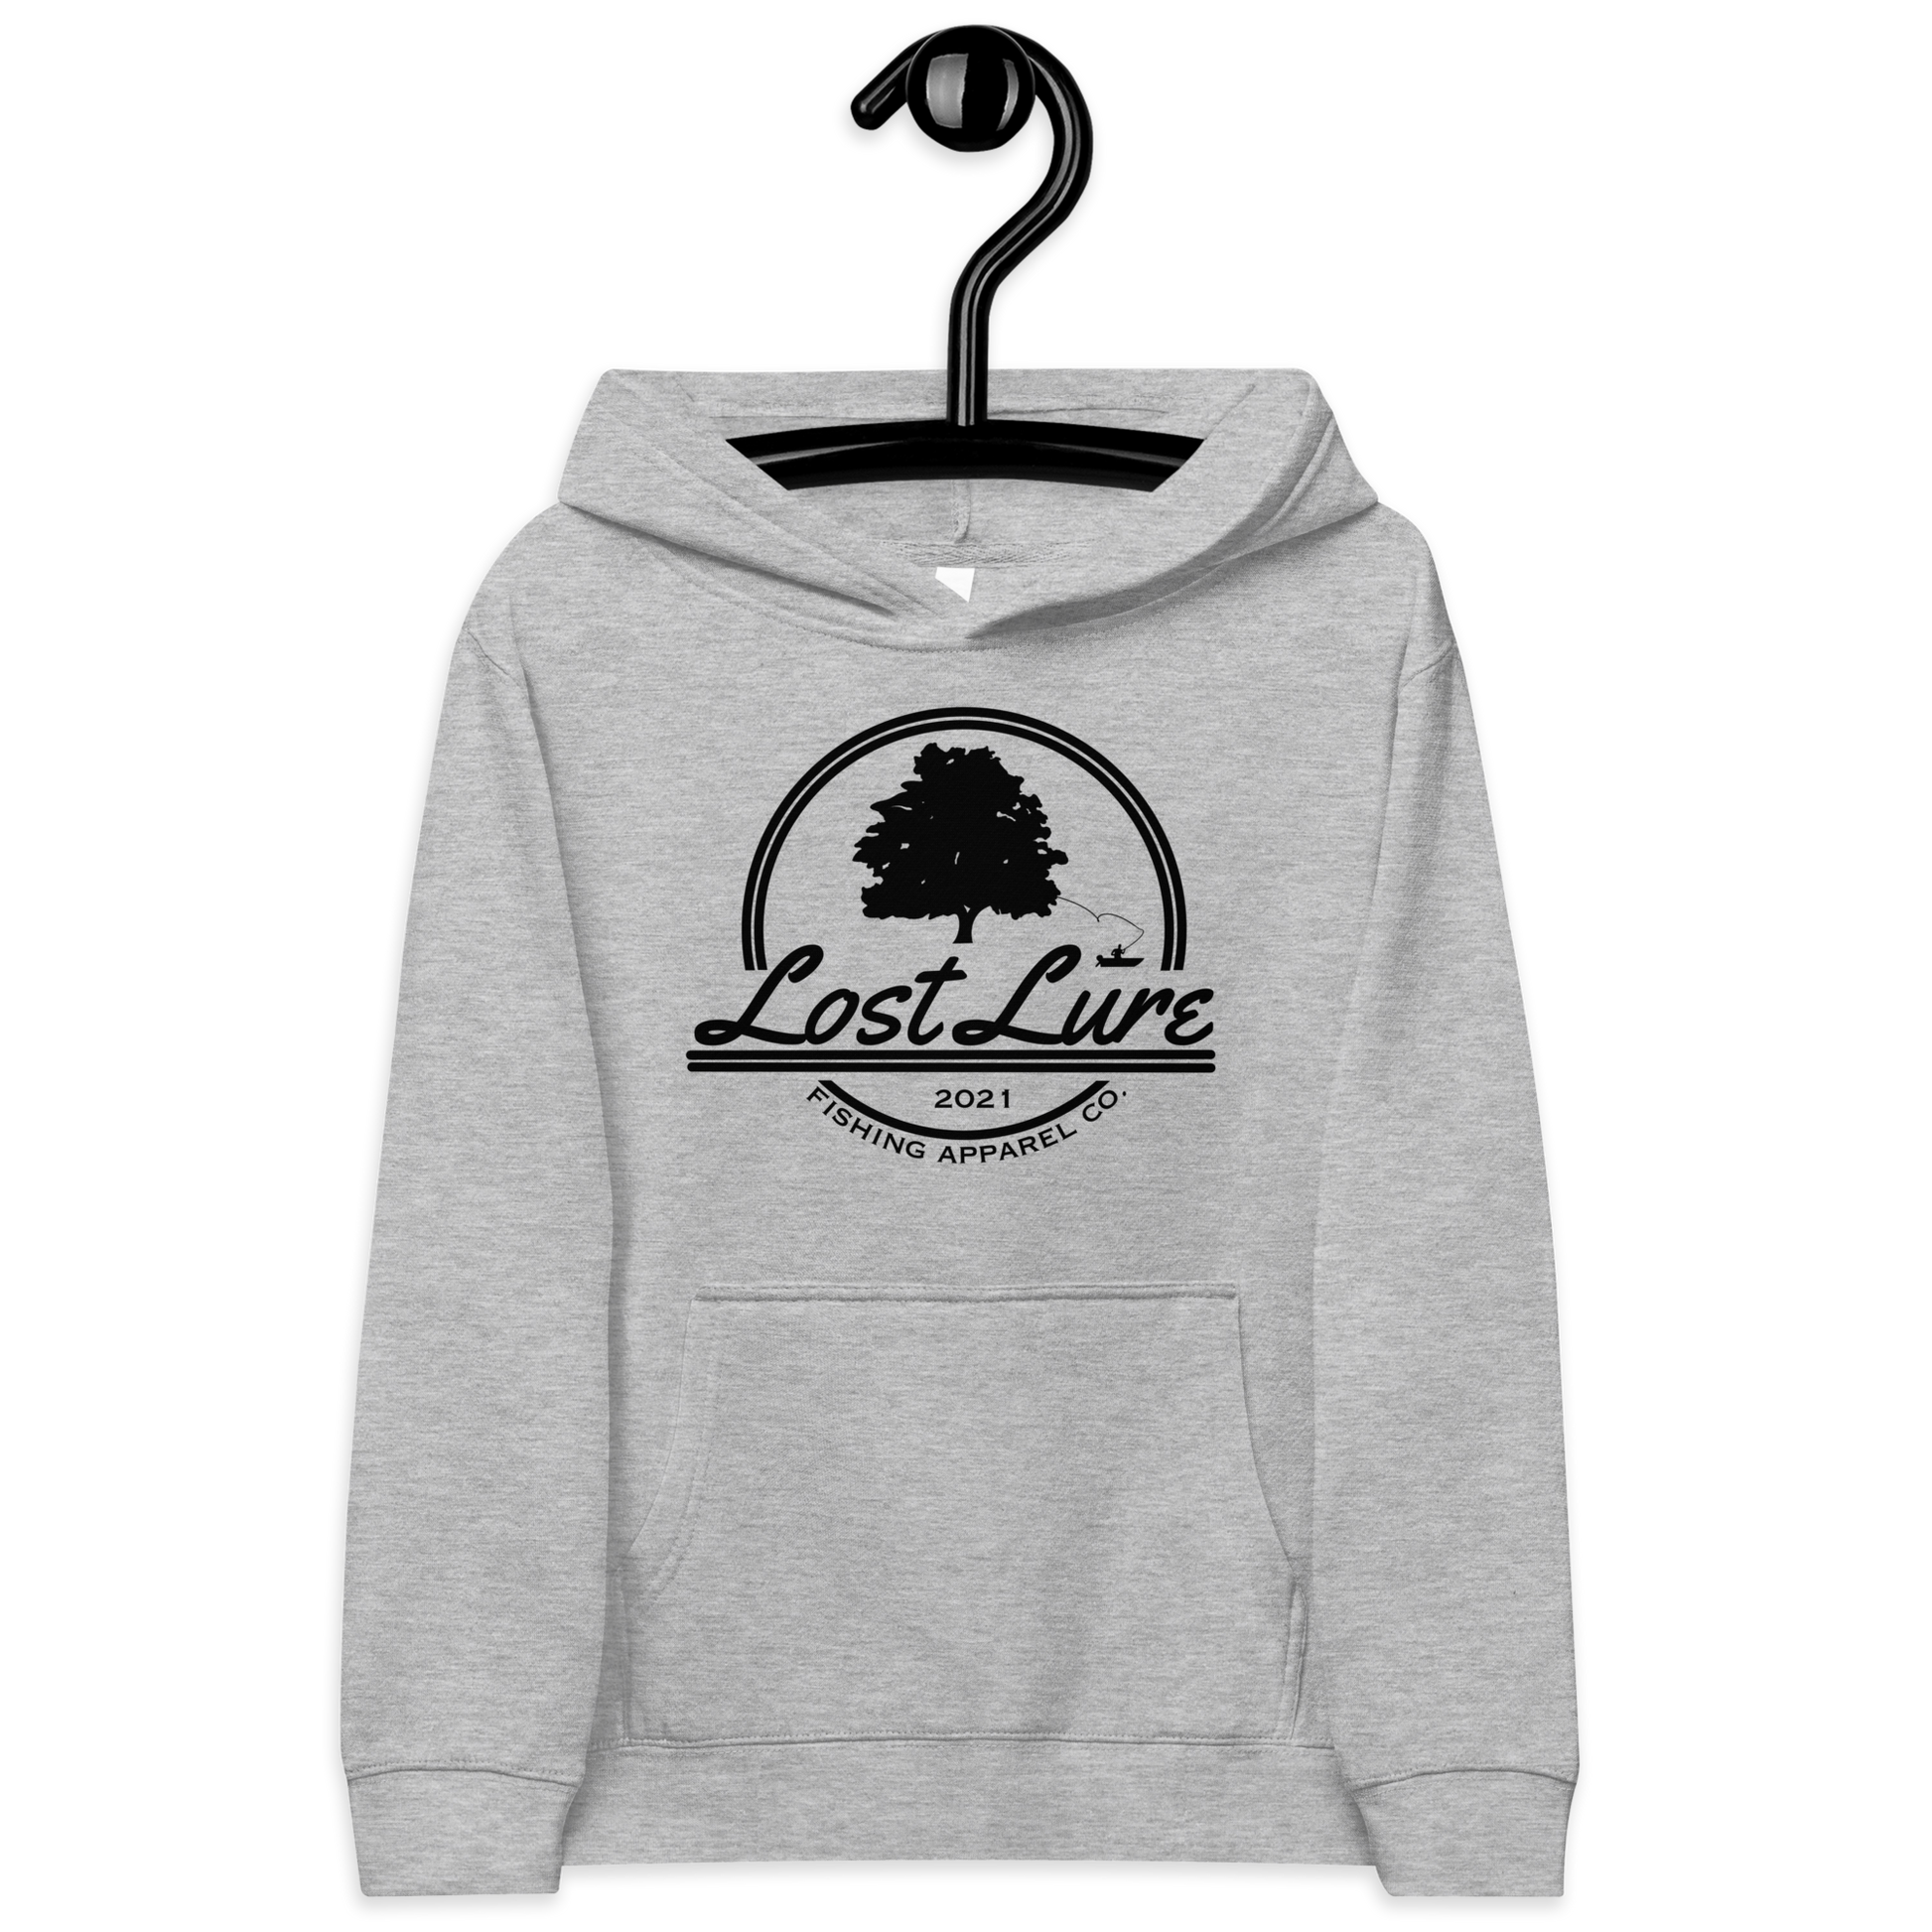 Grey Kids size fishing hoodie with lost lure logo.